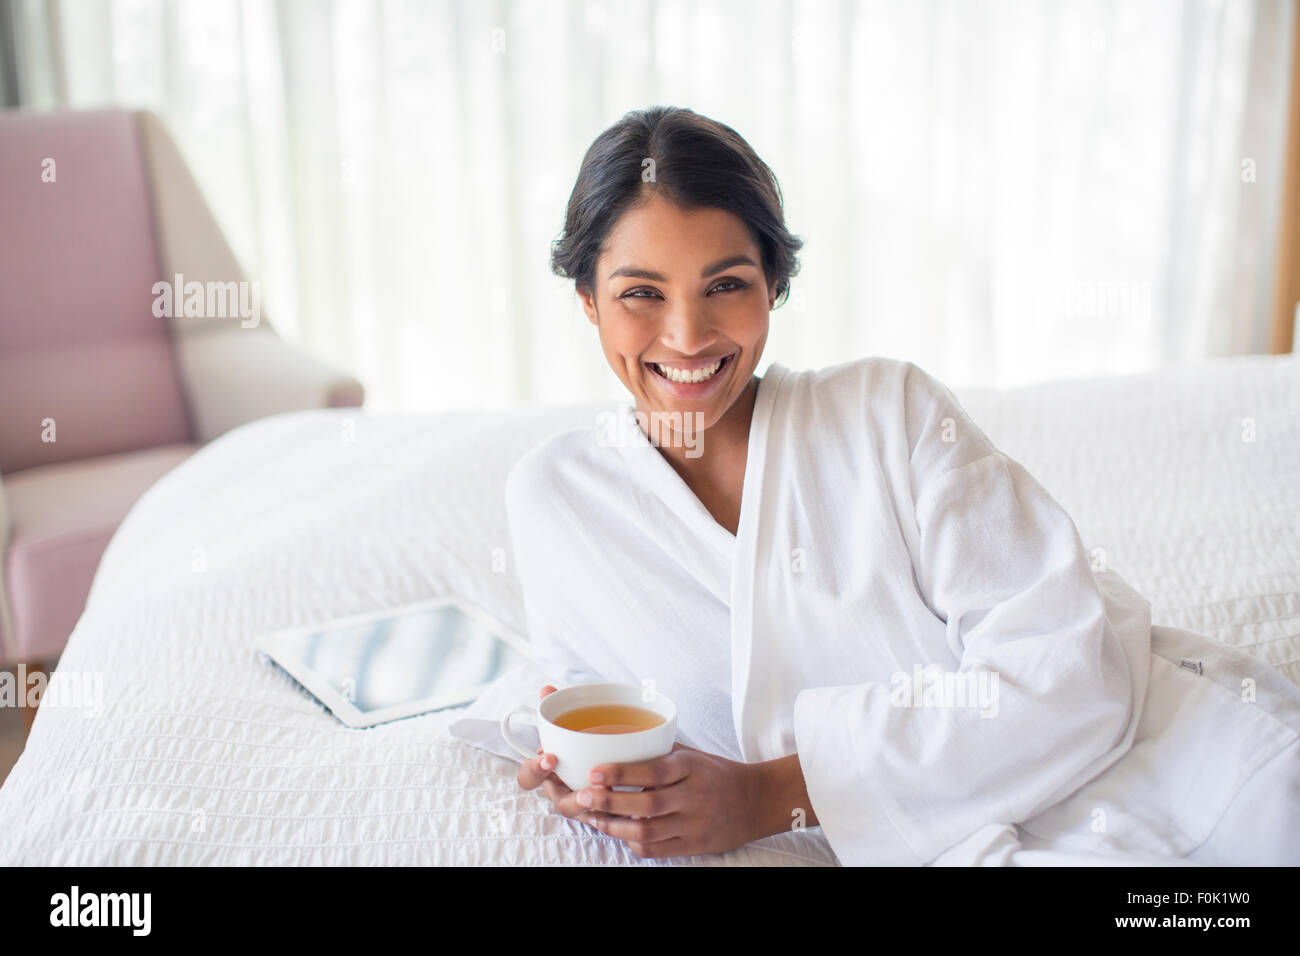 Portrait of smiling woman in bathrobe drinking tea on bed Banque D'Images